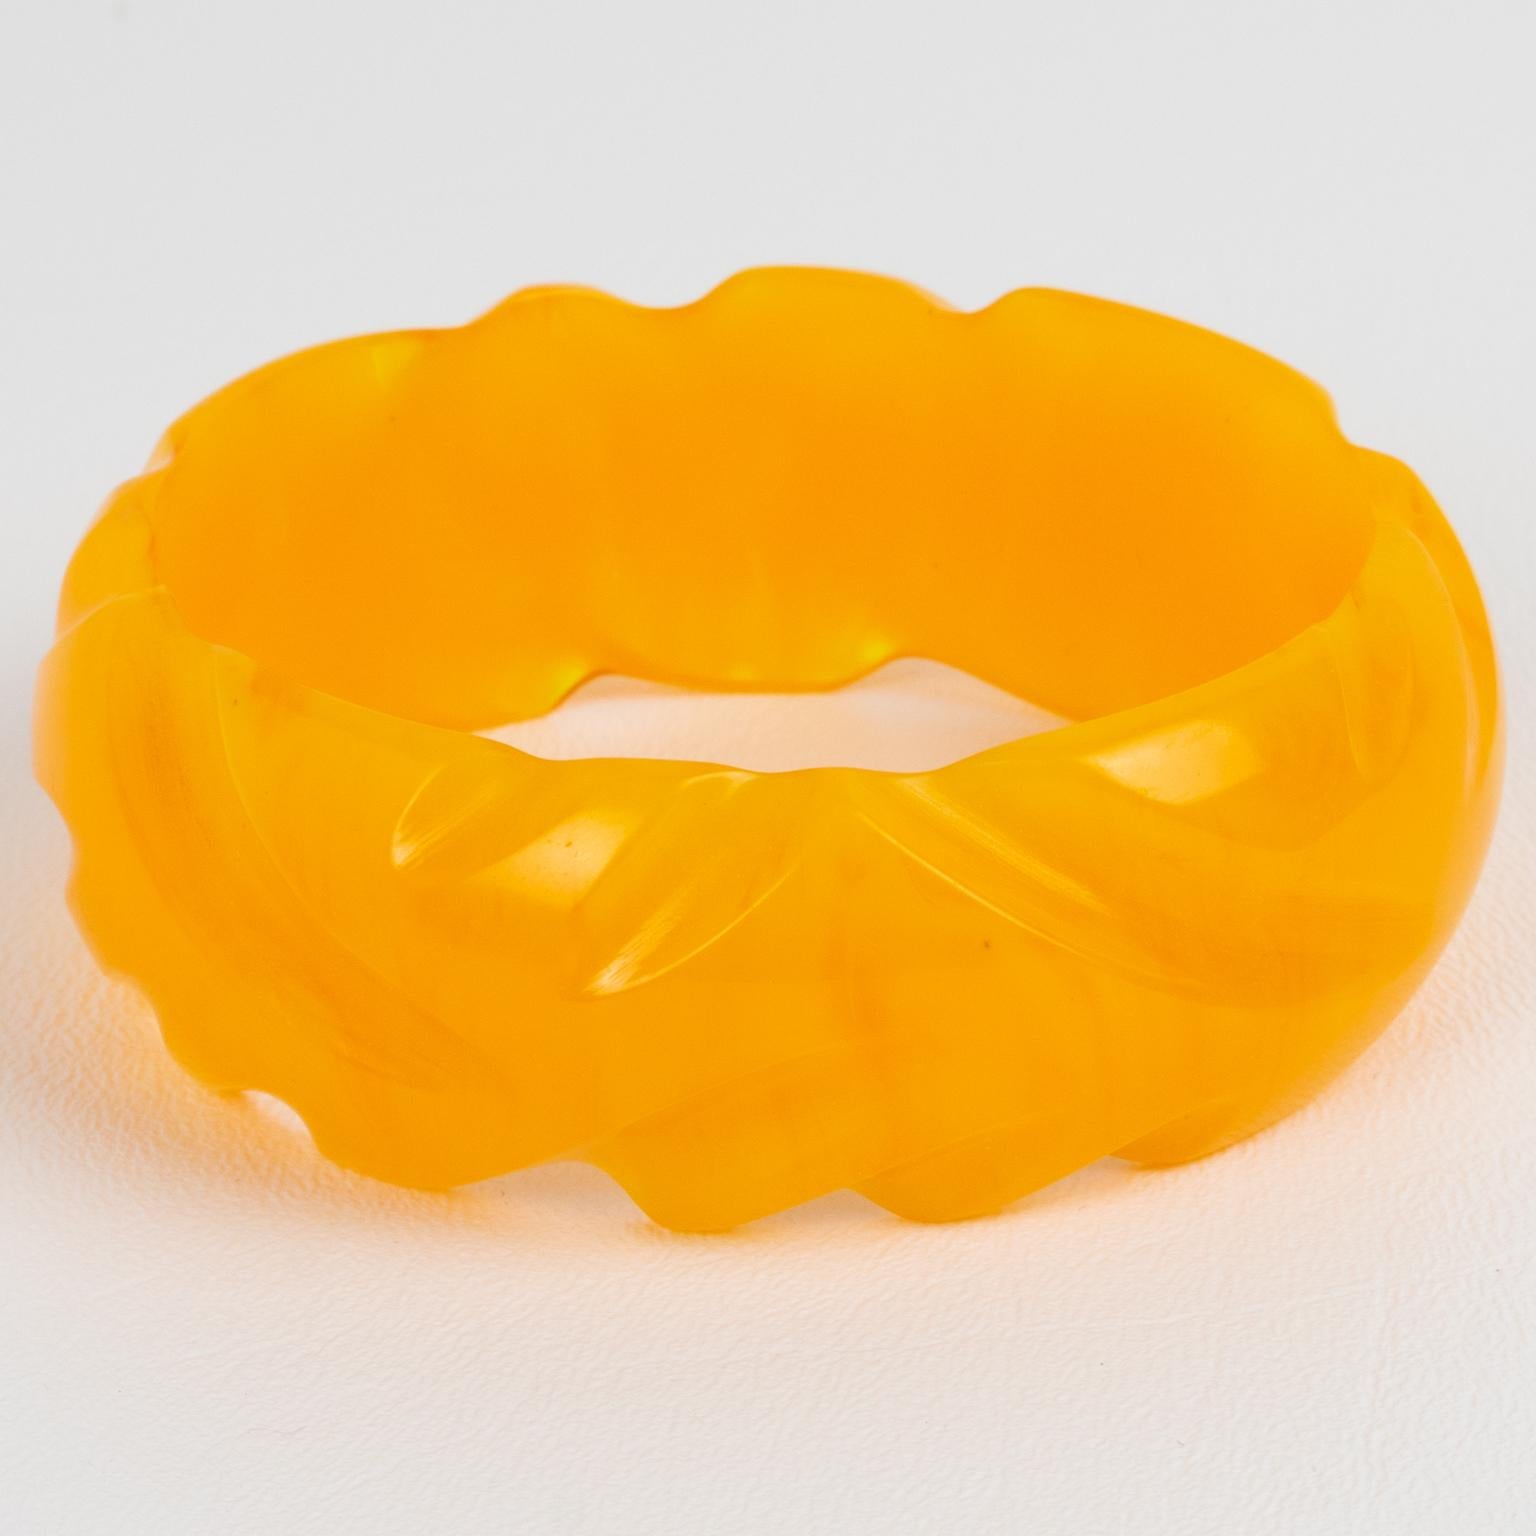 This is a lovely yellow marigold marble Bakelite carved bracelet bangle. It features a chunky domed shape with a carved design all around. The color is a sunny intense warm yellow tone with lighter milky swirling.
Good condition, with a tiny air